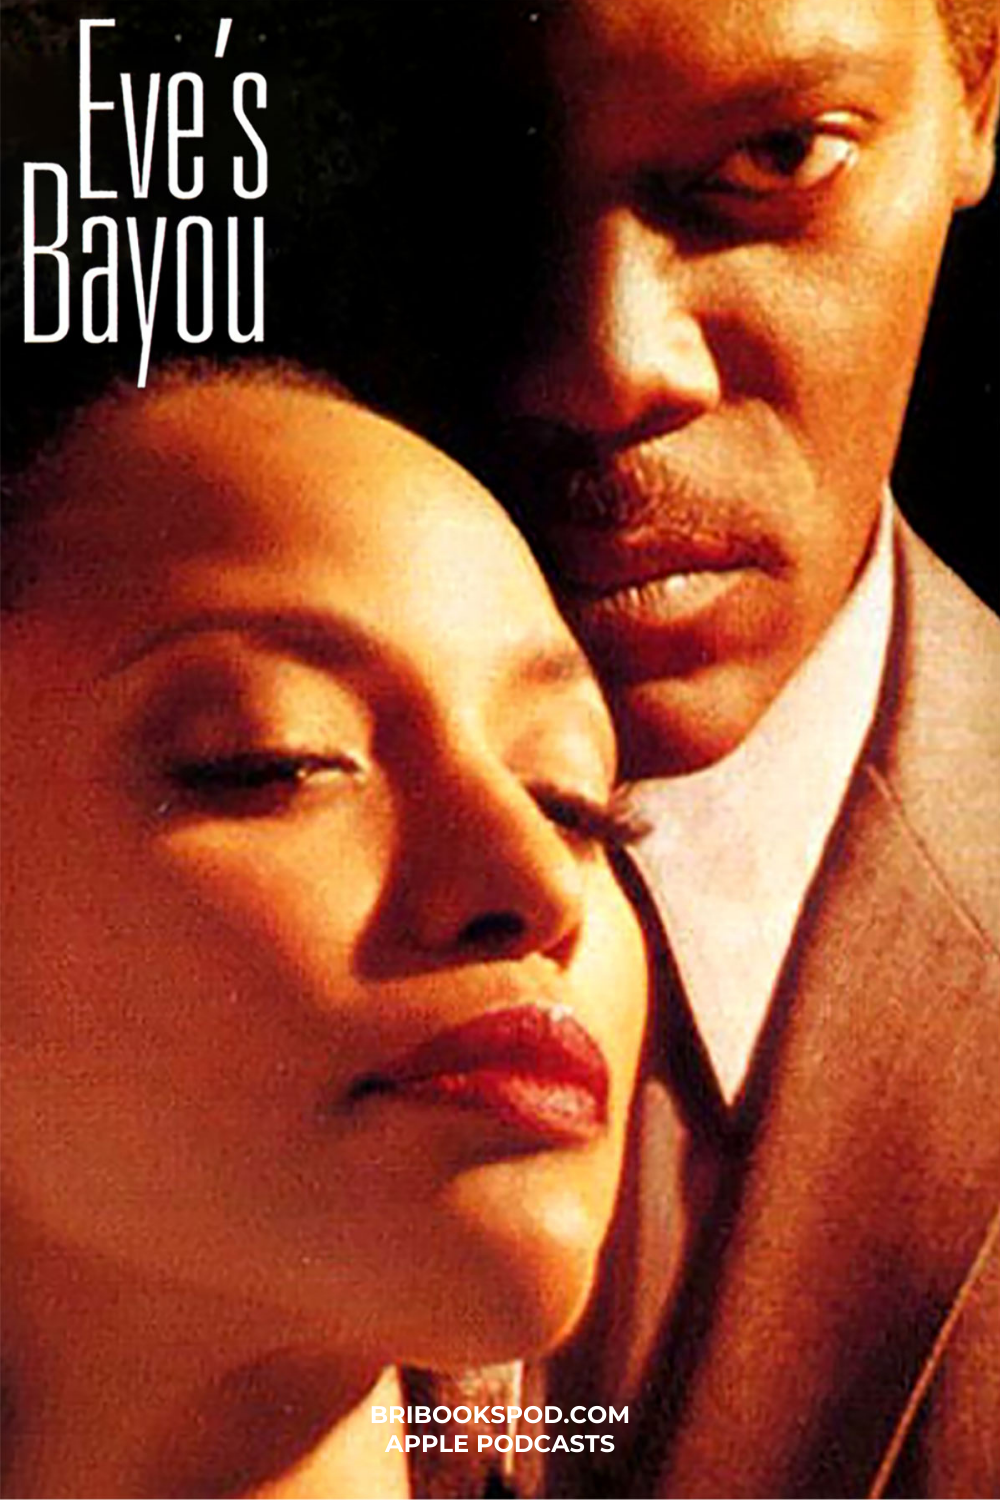 10 Best Movies to Watch Right Now: Eve's Bayou